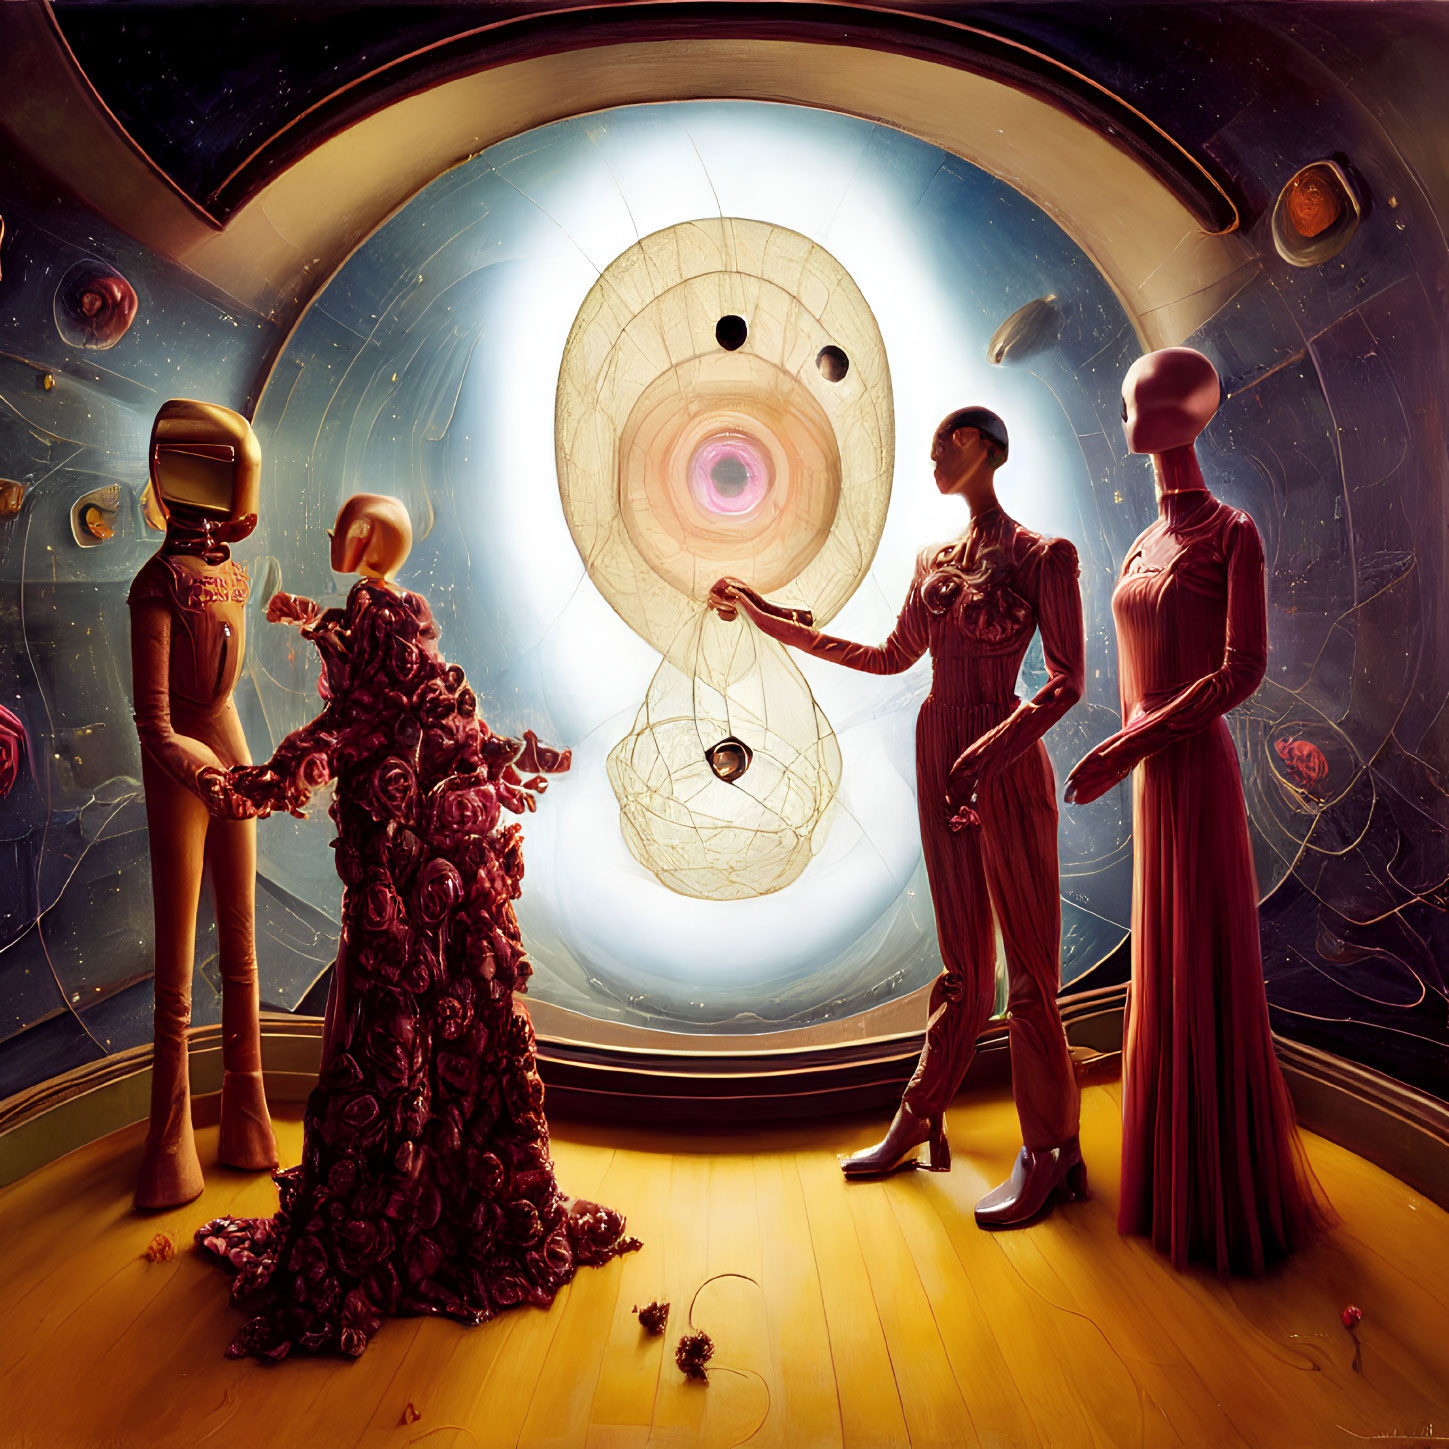 Surreal artwork: Human figures in ornate attire, robotic heads, cosmic window view, holding